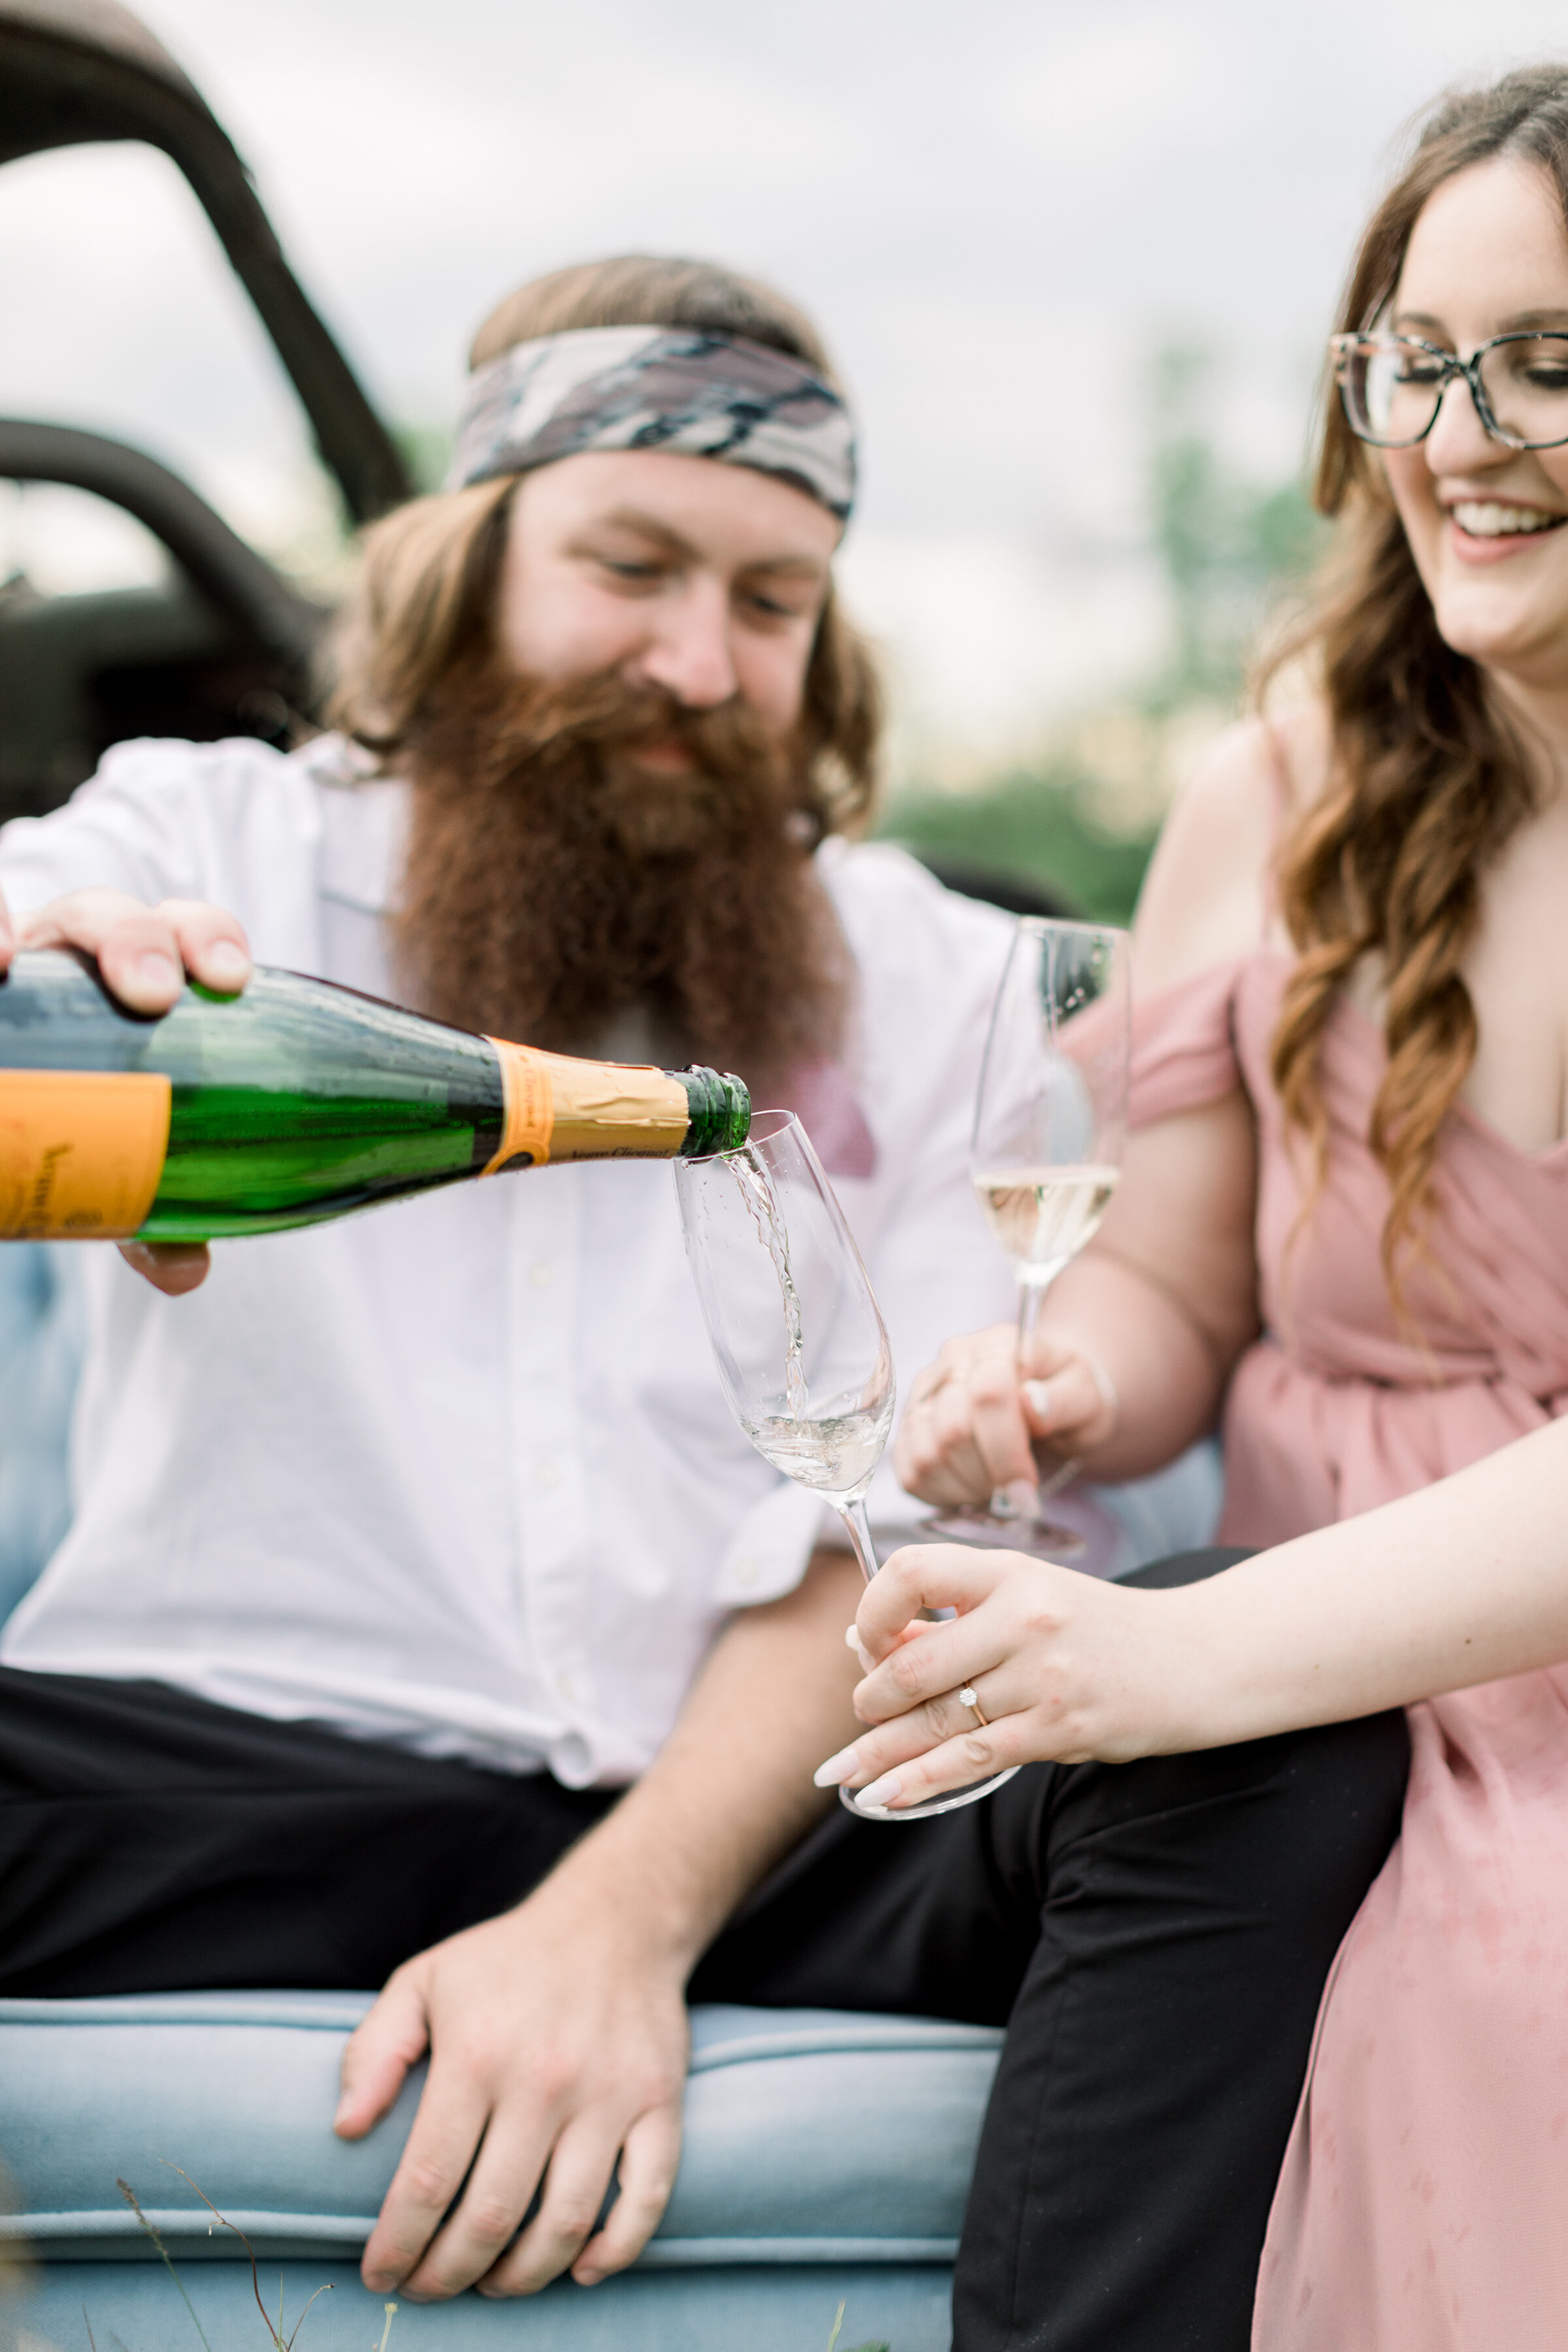  The groom pours the Champagne for his soon to be bride in a beautiful outdoor engagement photo shoot by professional engagement photographer Chelsea Mason Photography. Engagement session inspiration ideas and goals sitting couple pose inspiration po